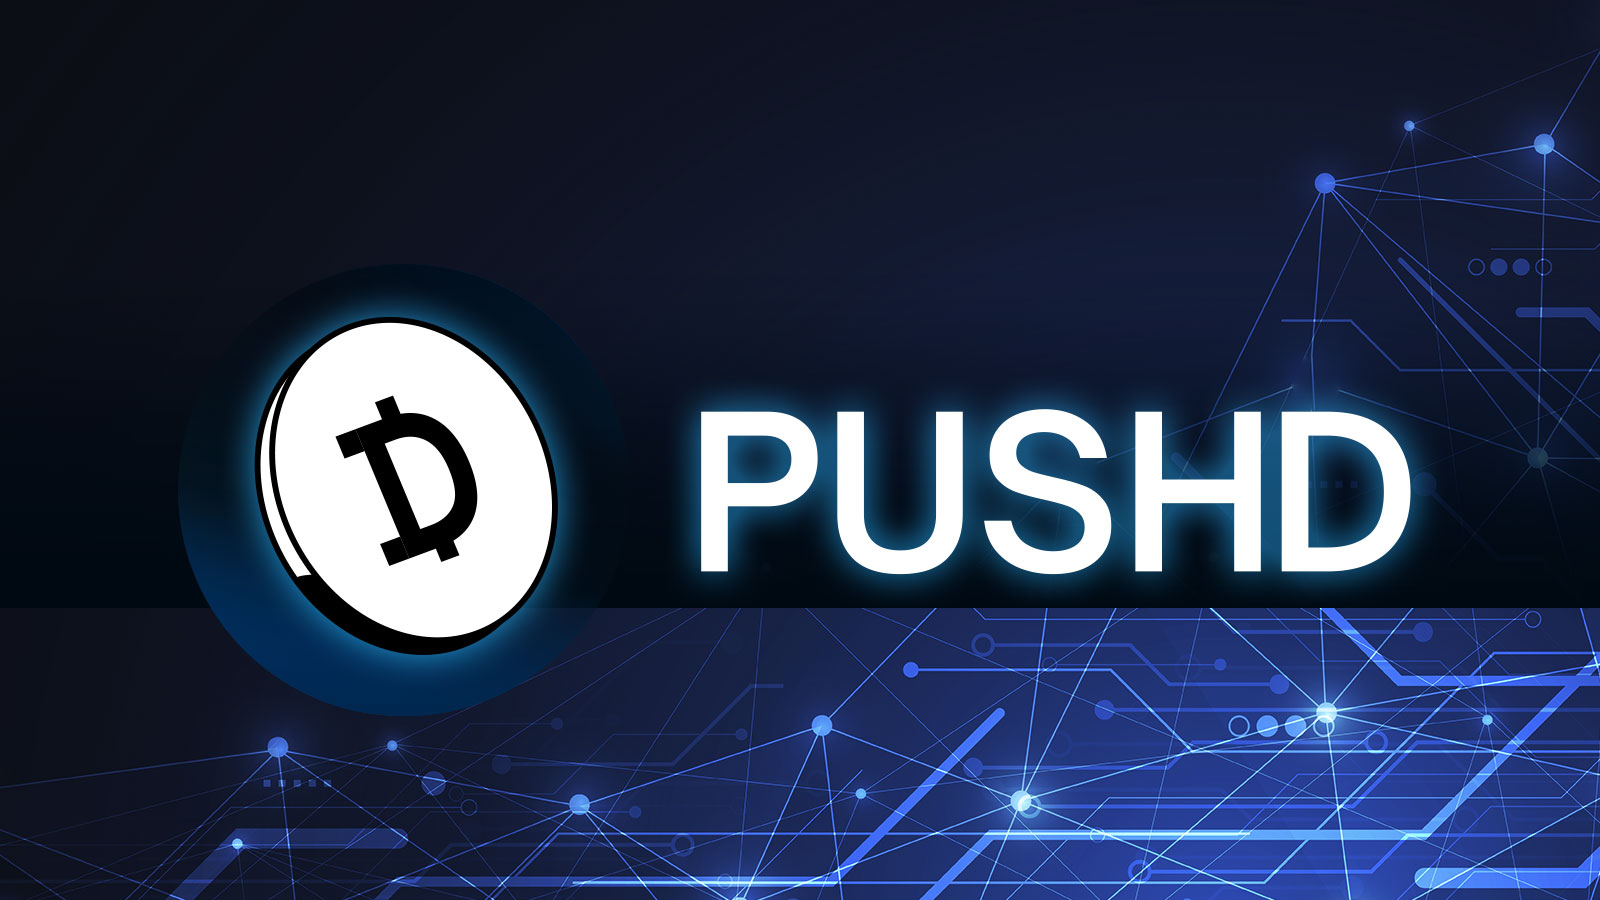 Pushd (PUSHD) Token Sale New Phase Might be Gaining Steam in February as Solana (SOL) and Dogecoin (DOGE) Large-Caps Recovering